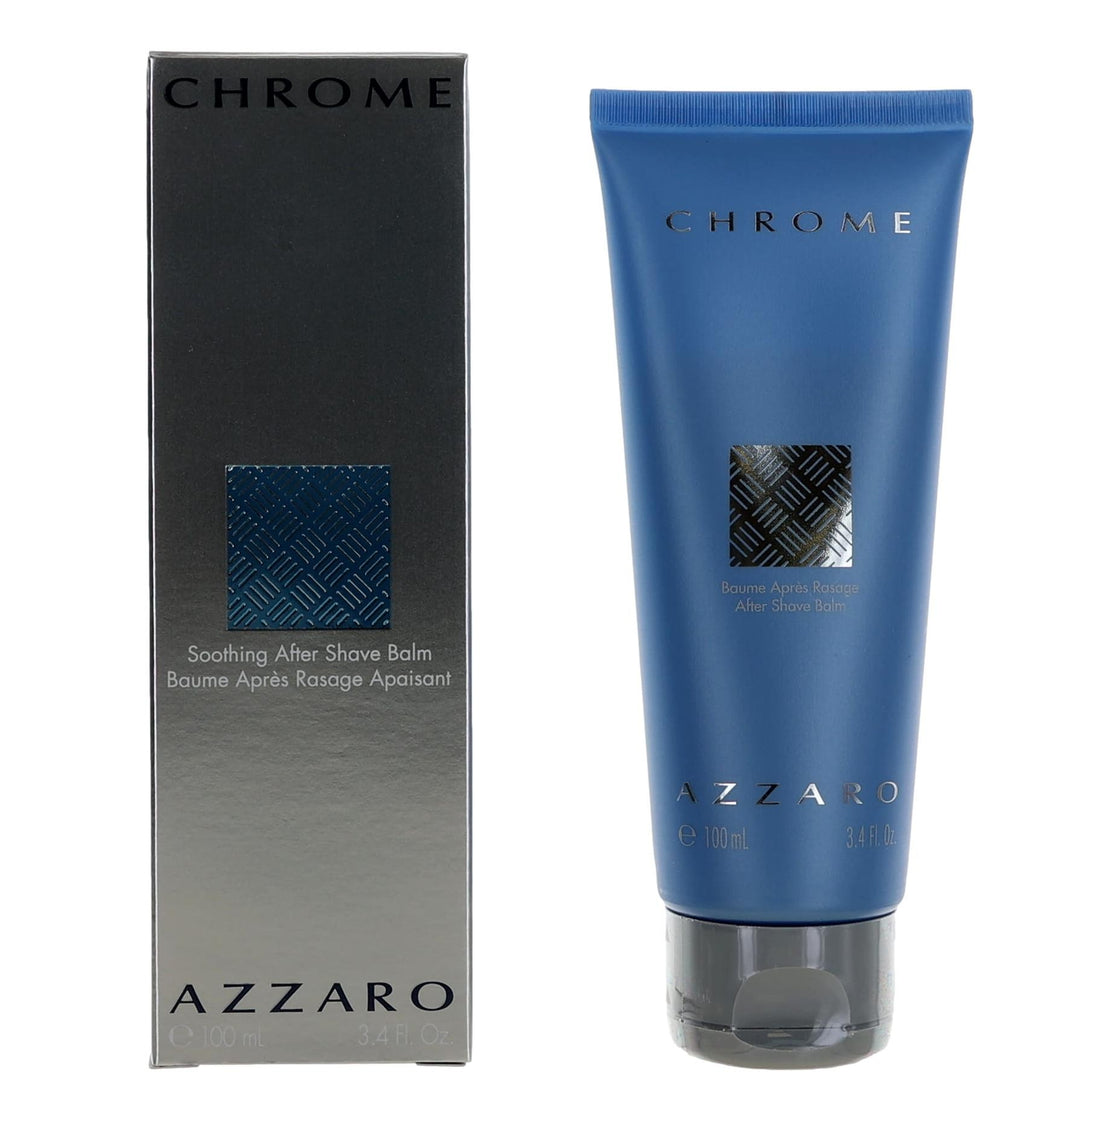 Chrome By Azzaro, 3.4 Oz After Shave Balm For Men